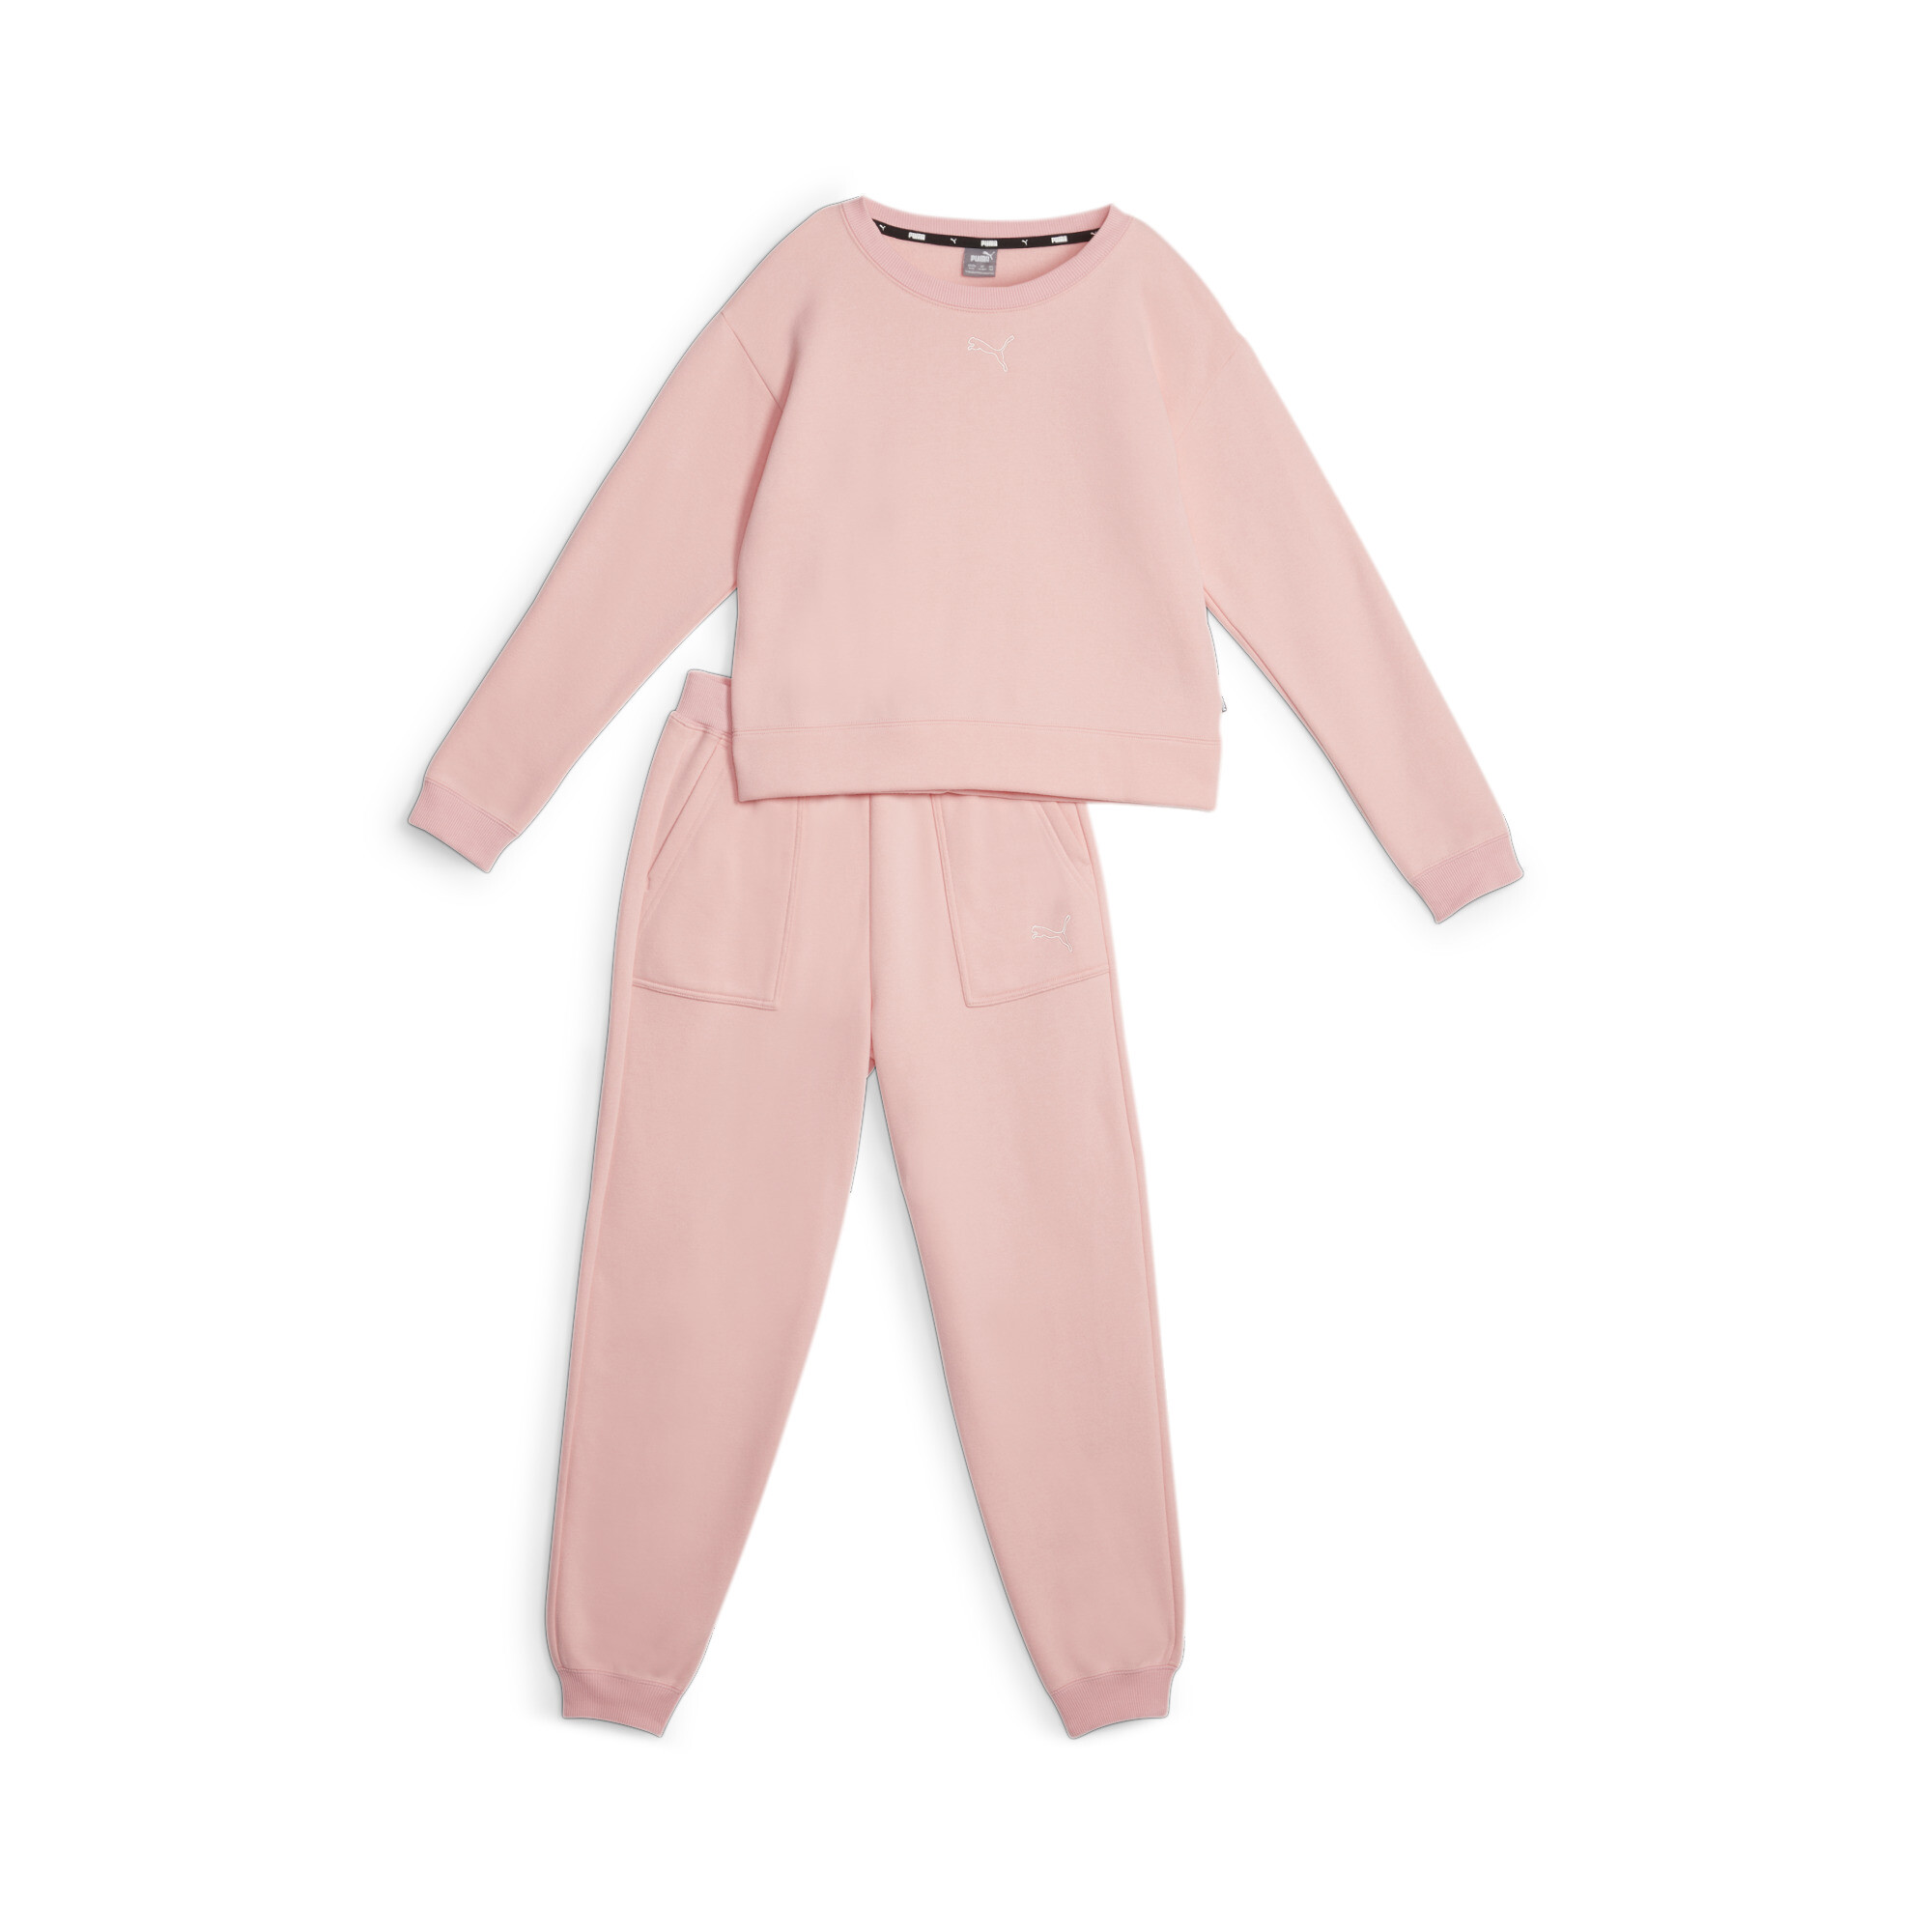 Women's Puma Loungewear Suit Youth, Pink, Size 5-6Y, Clothing